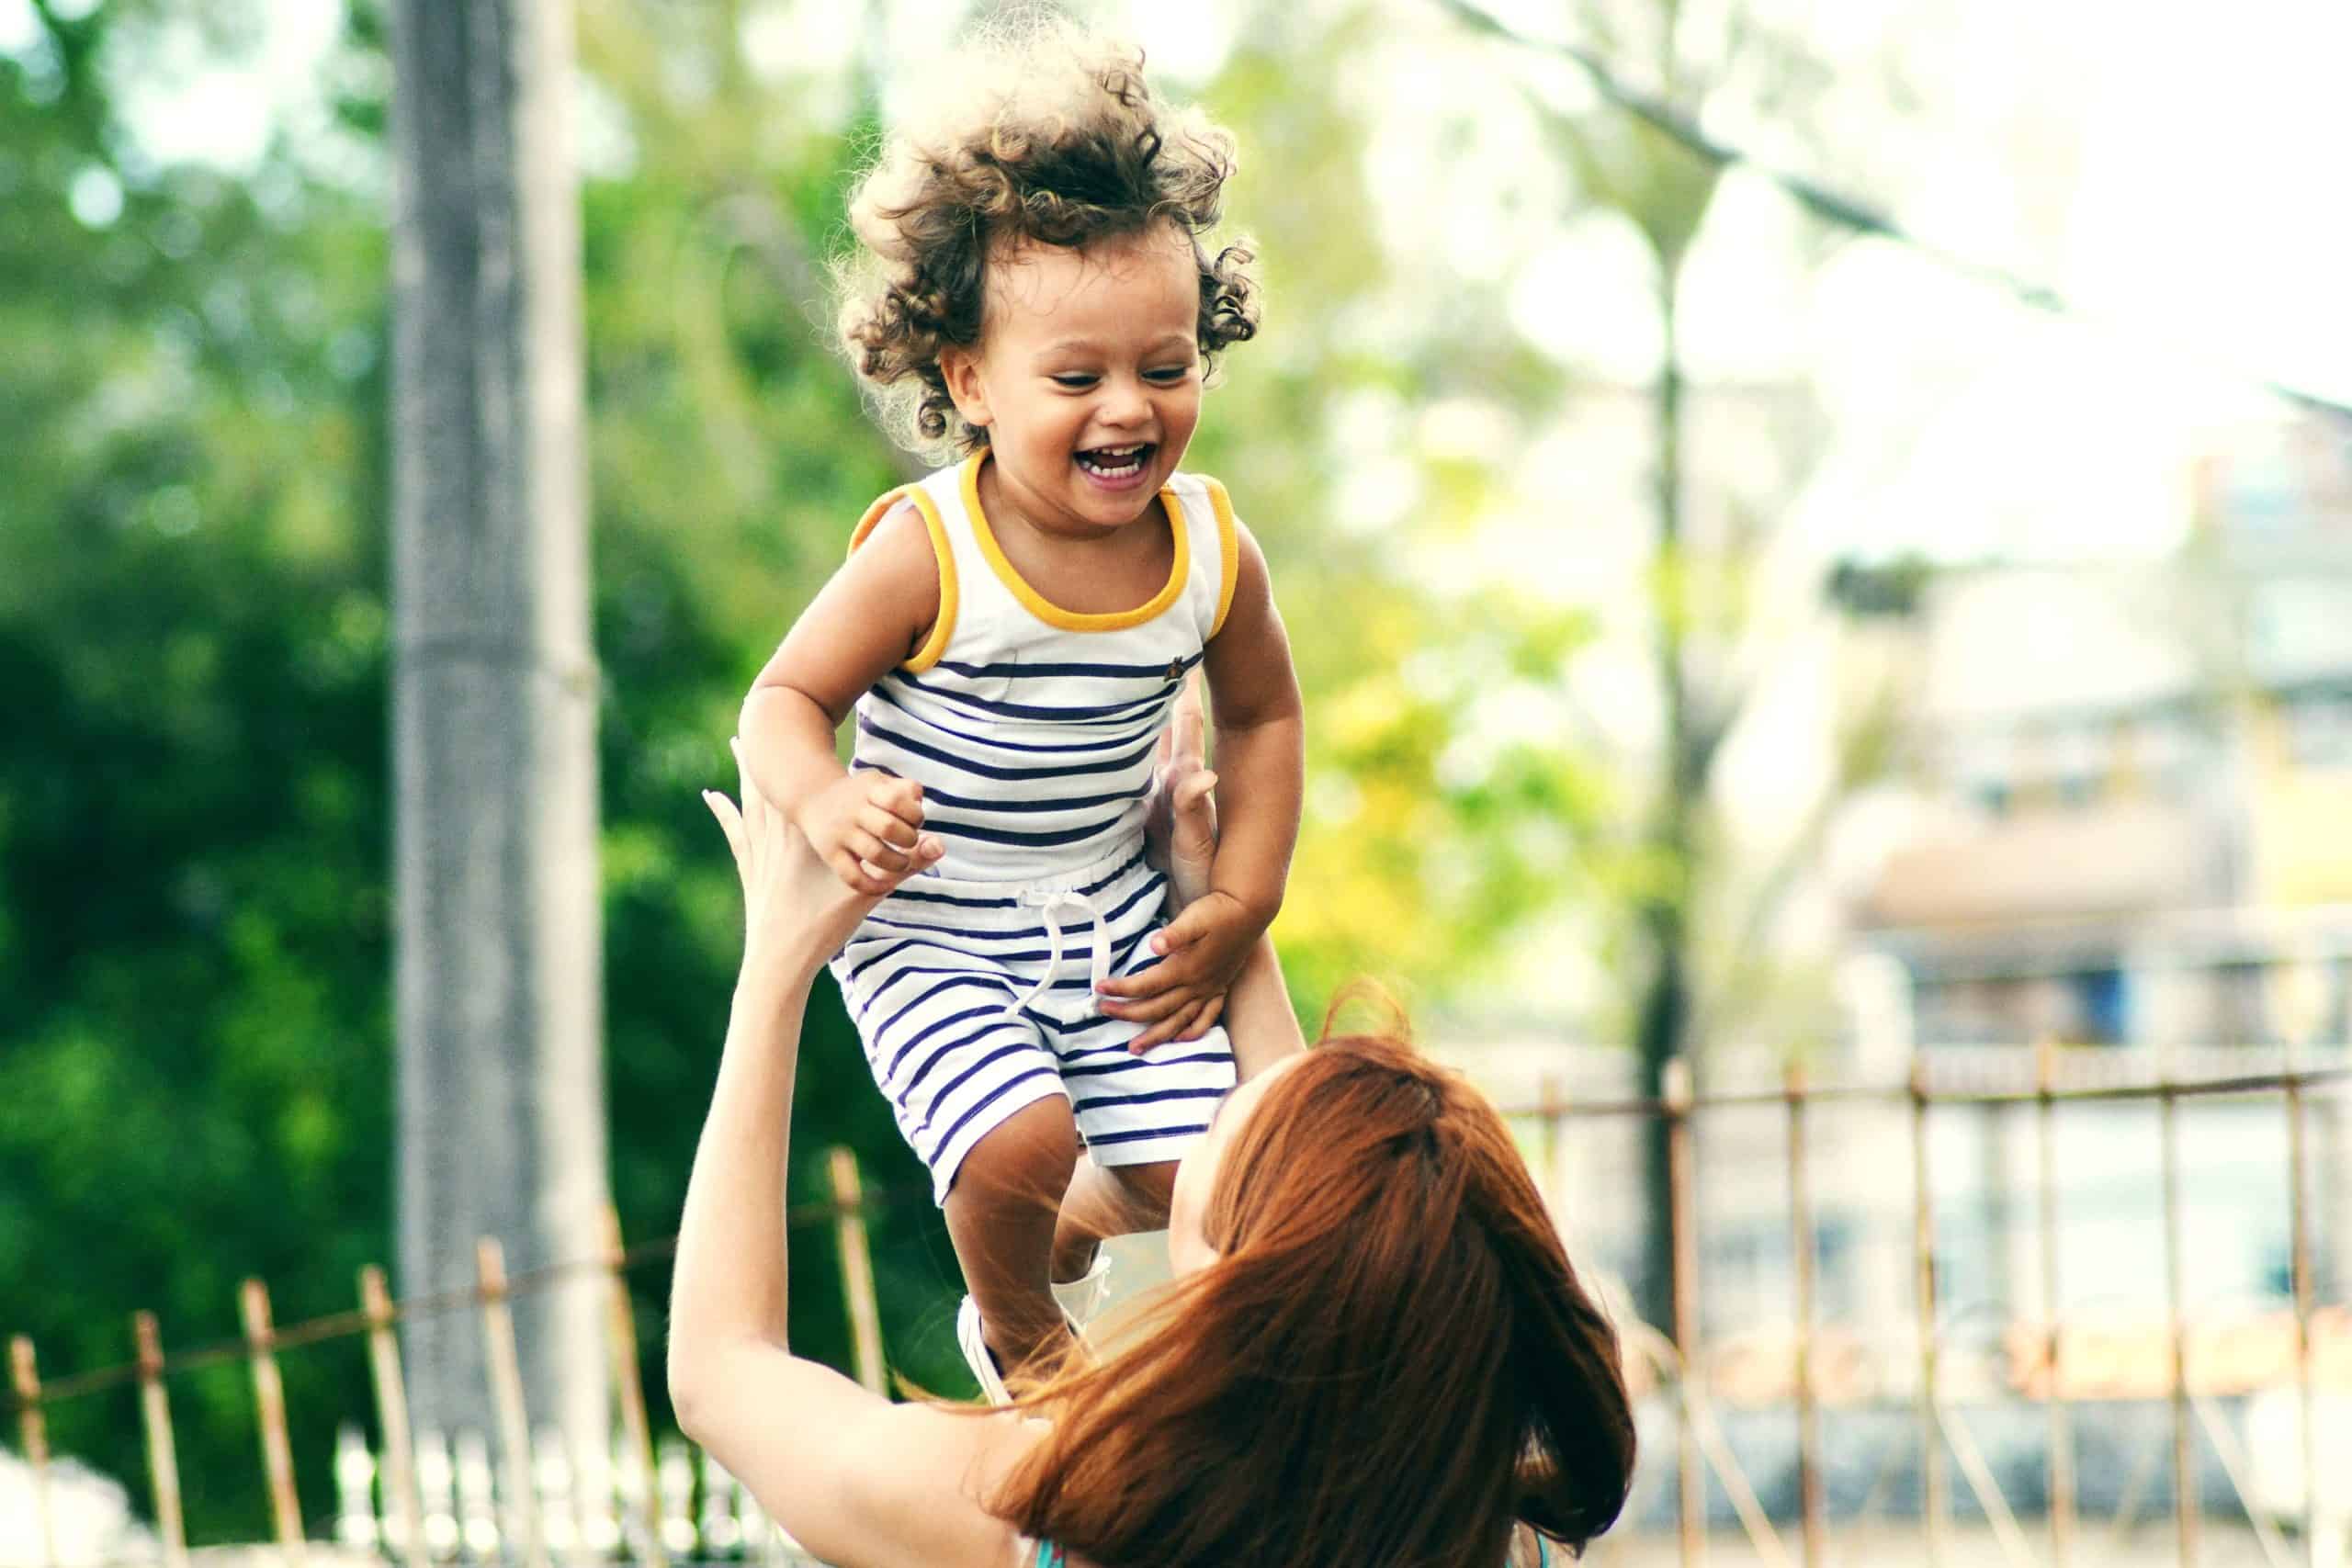 A child playing with mom. A pro-life inspiration story